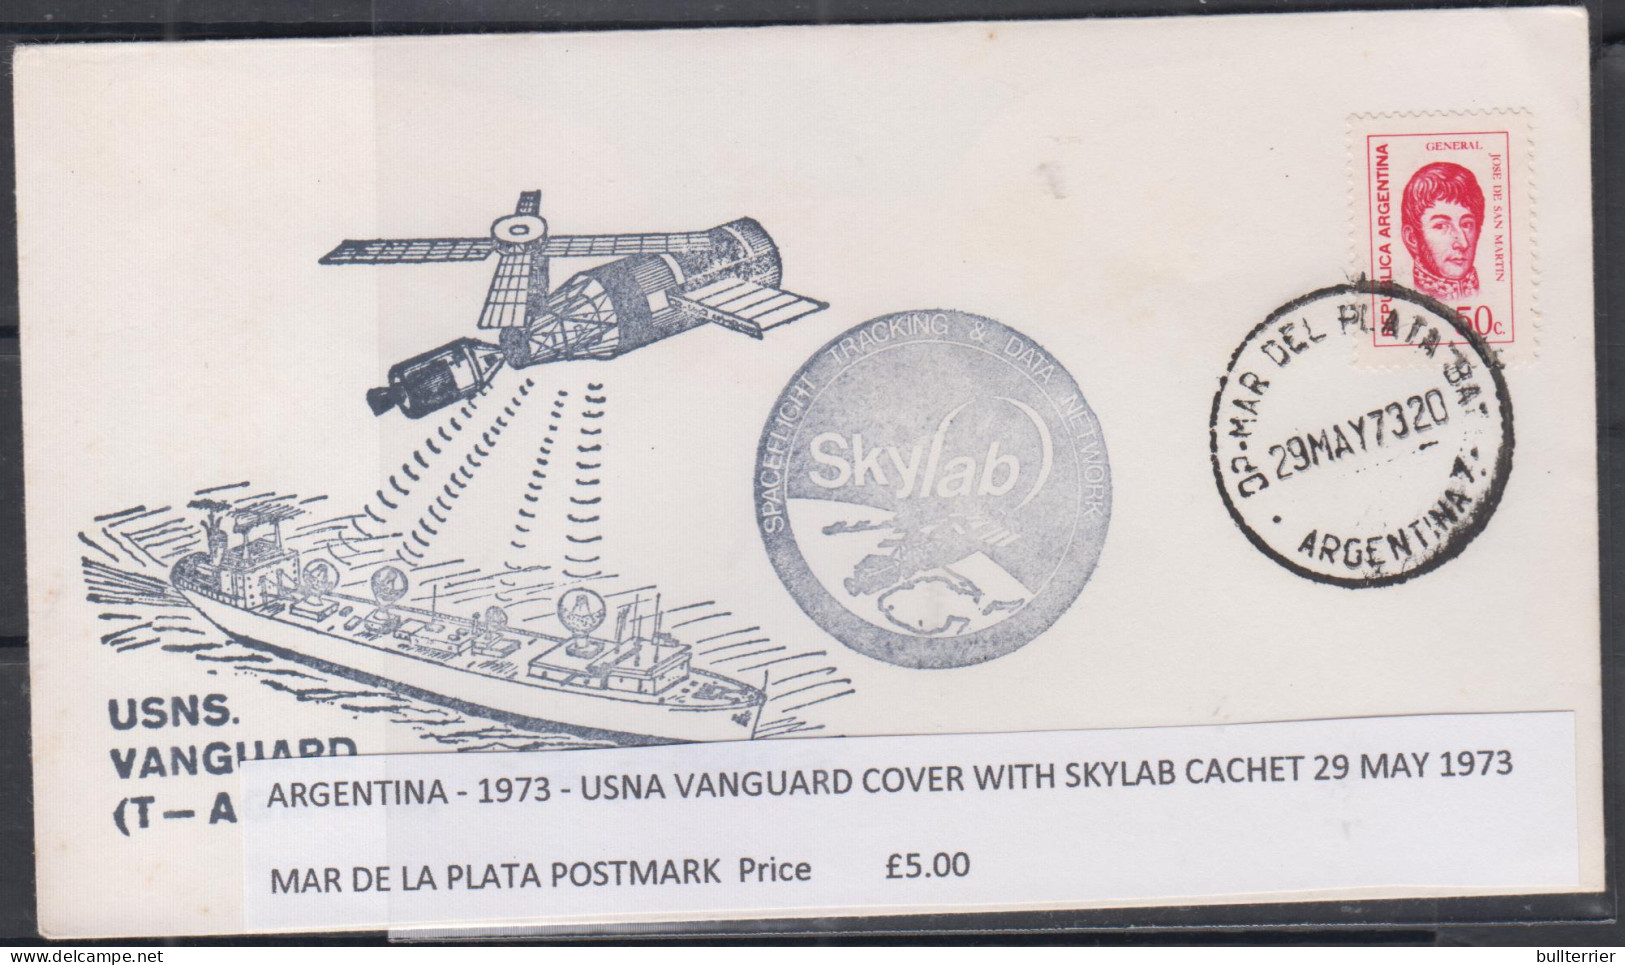 SPACE  - ARGENTINA - 1973- USNA VANGUARD COVER WITH SKYLAB CACHET  - South America